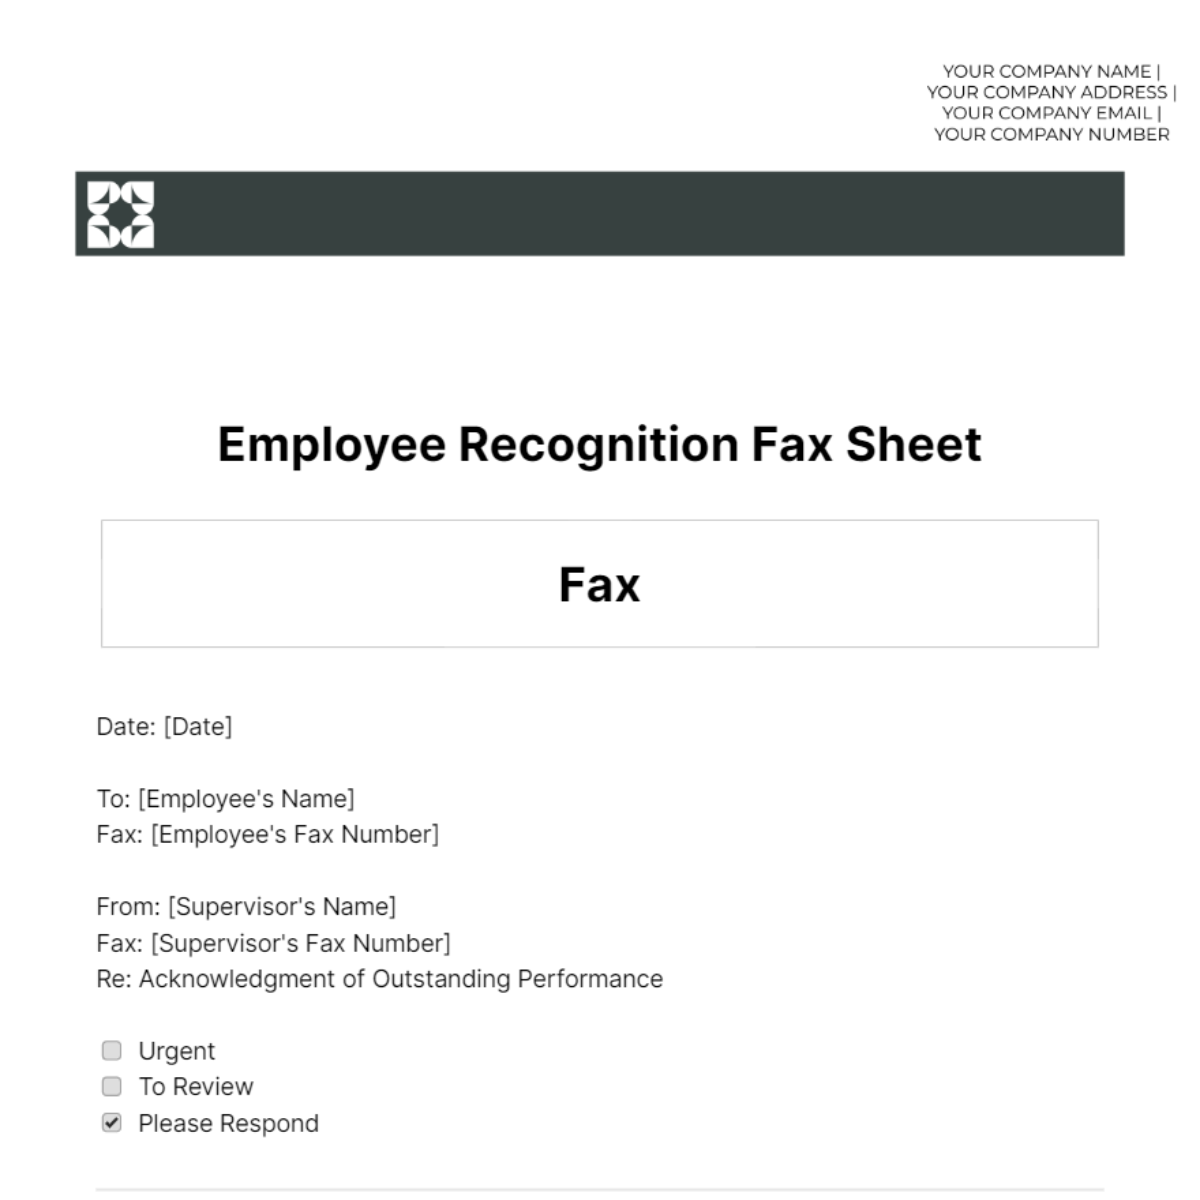 Employee Recognition Fax Sheet Template